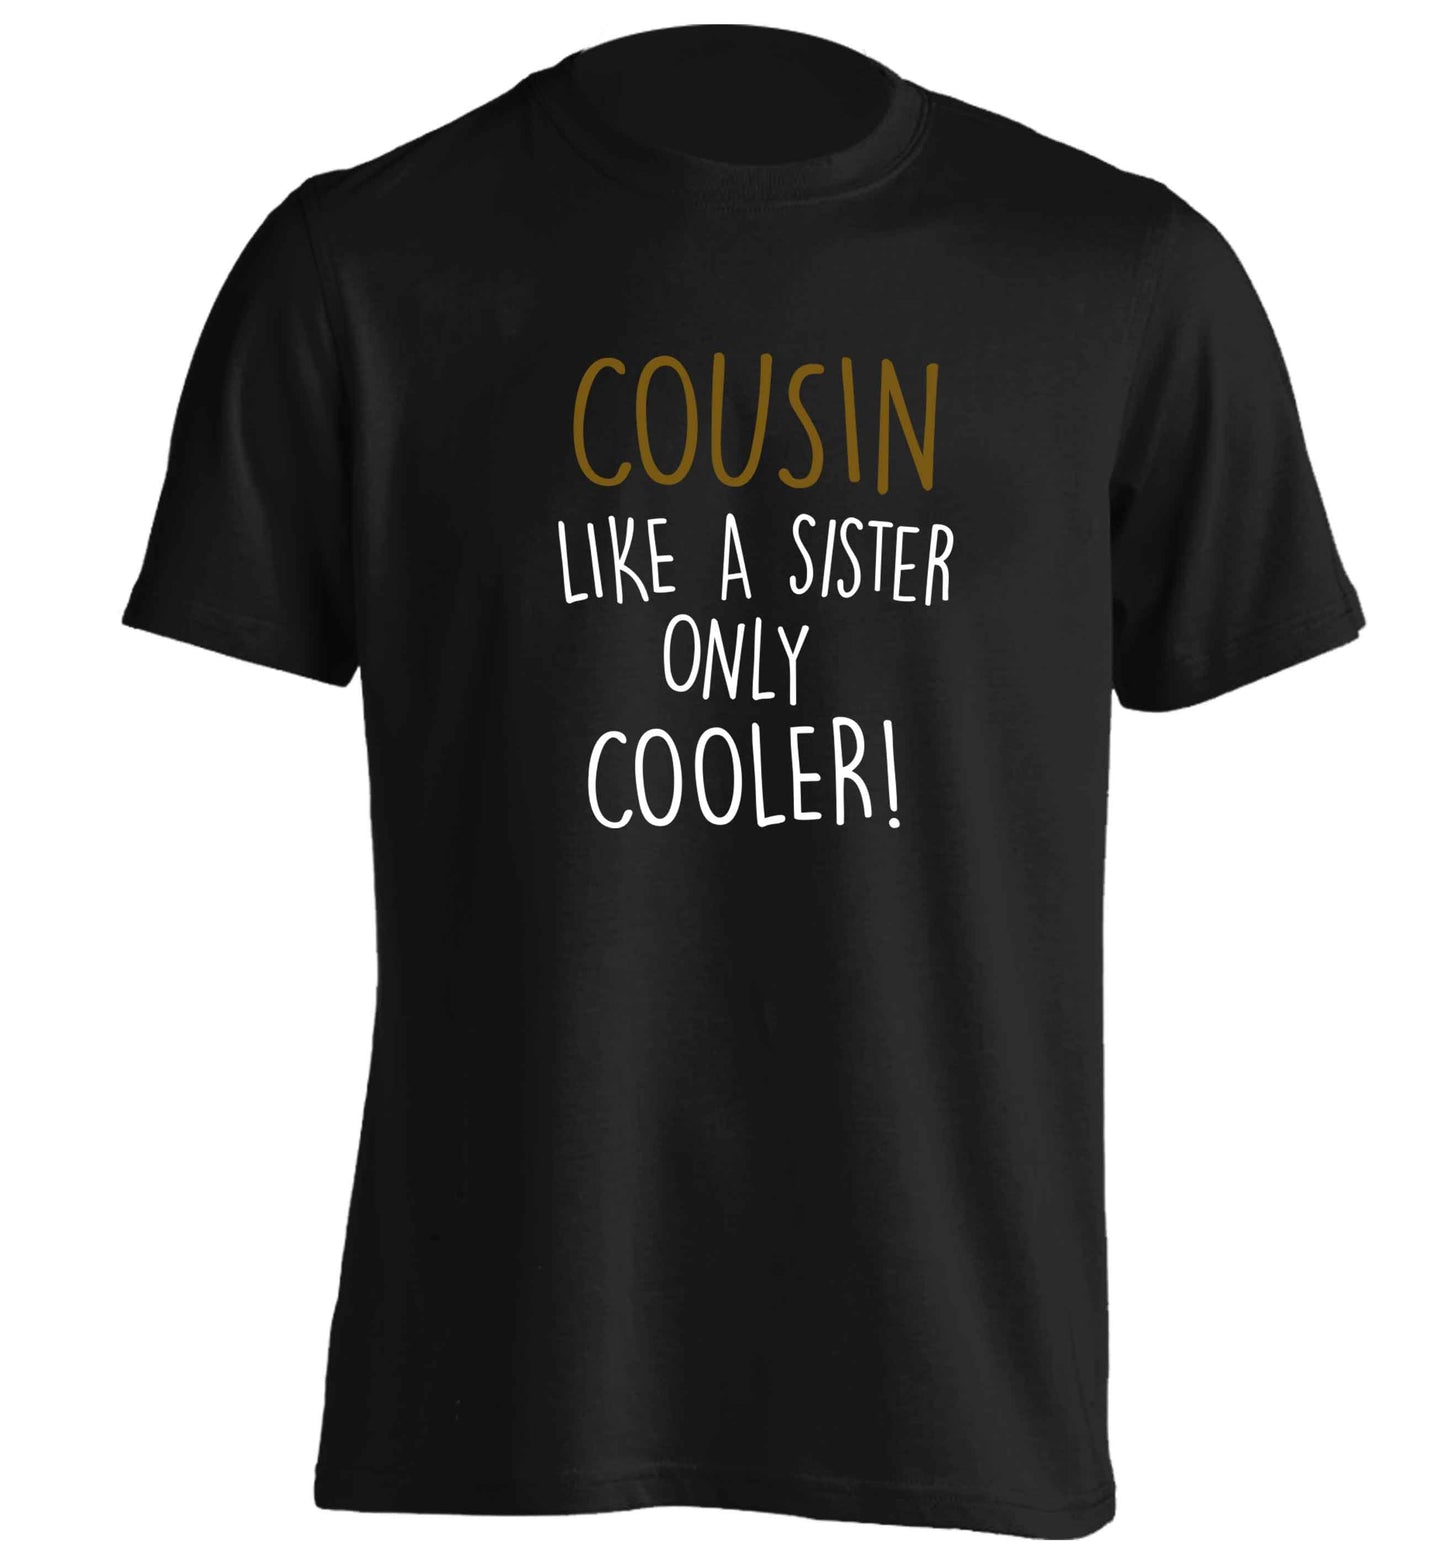 Cousin like a sister only cooler adults unisex black Tshirt 2XL